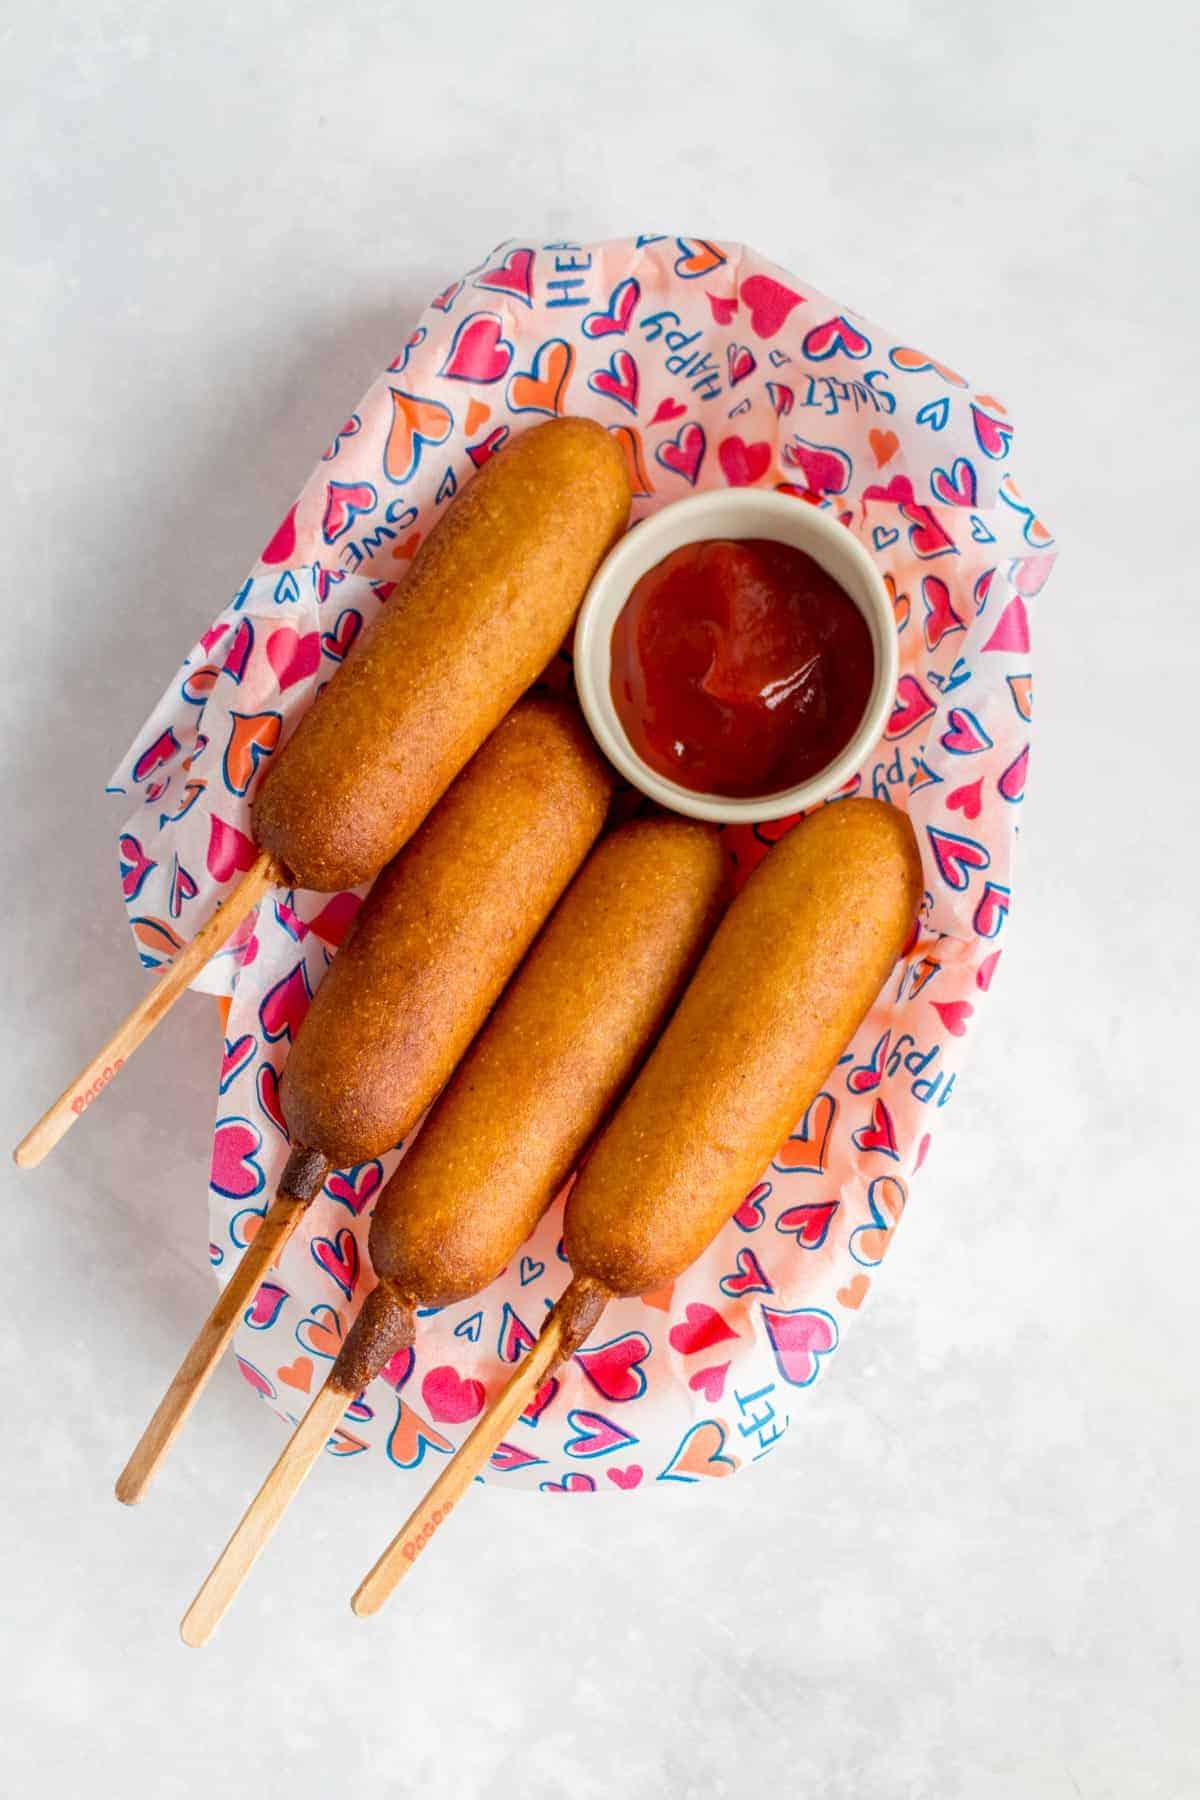 A basket of four corn dogs with a serving of ketchup.